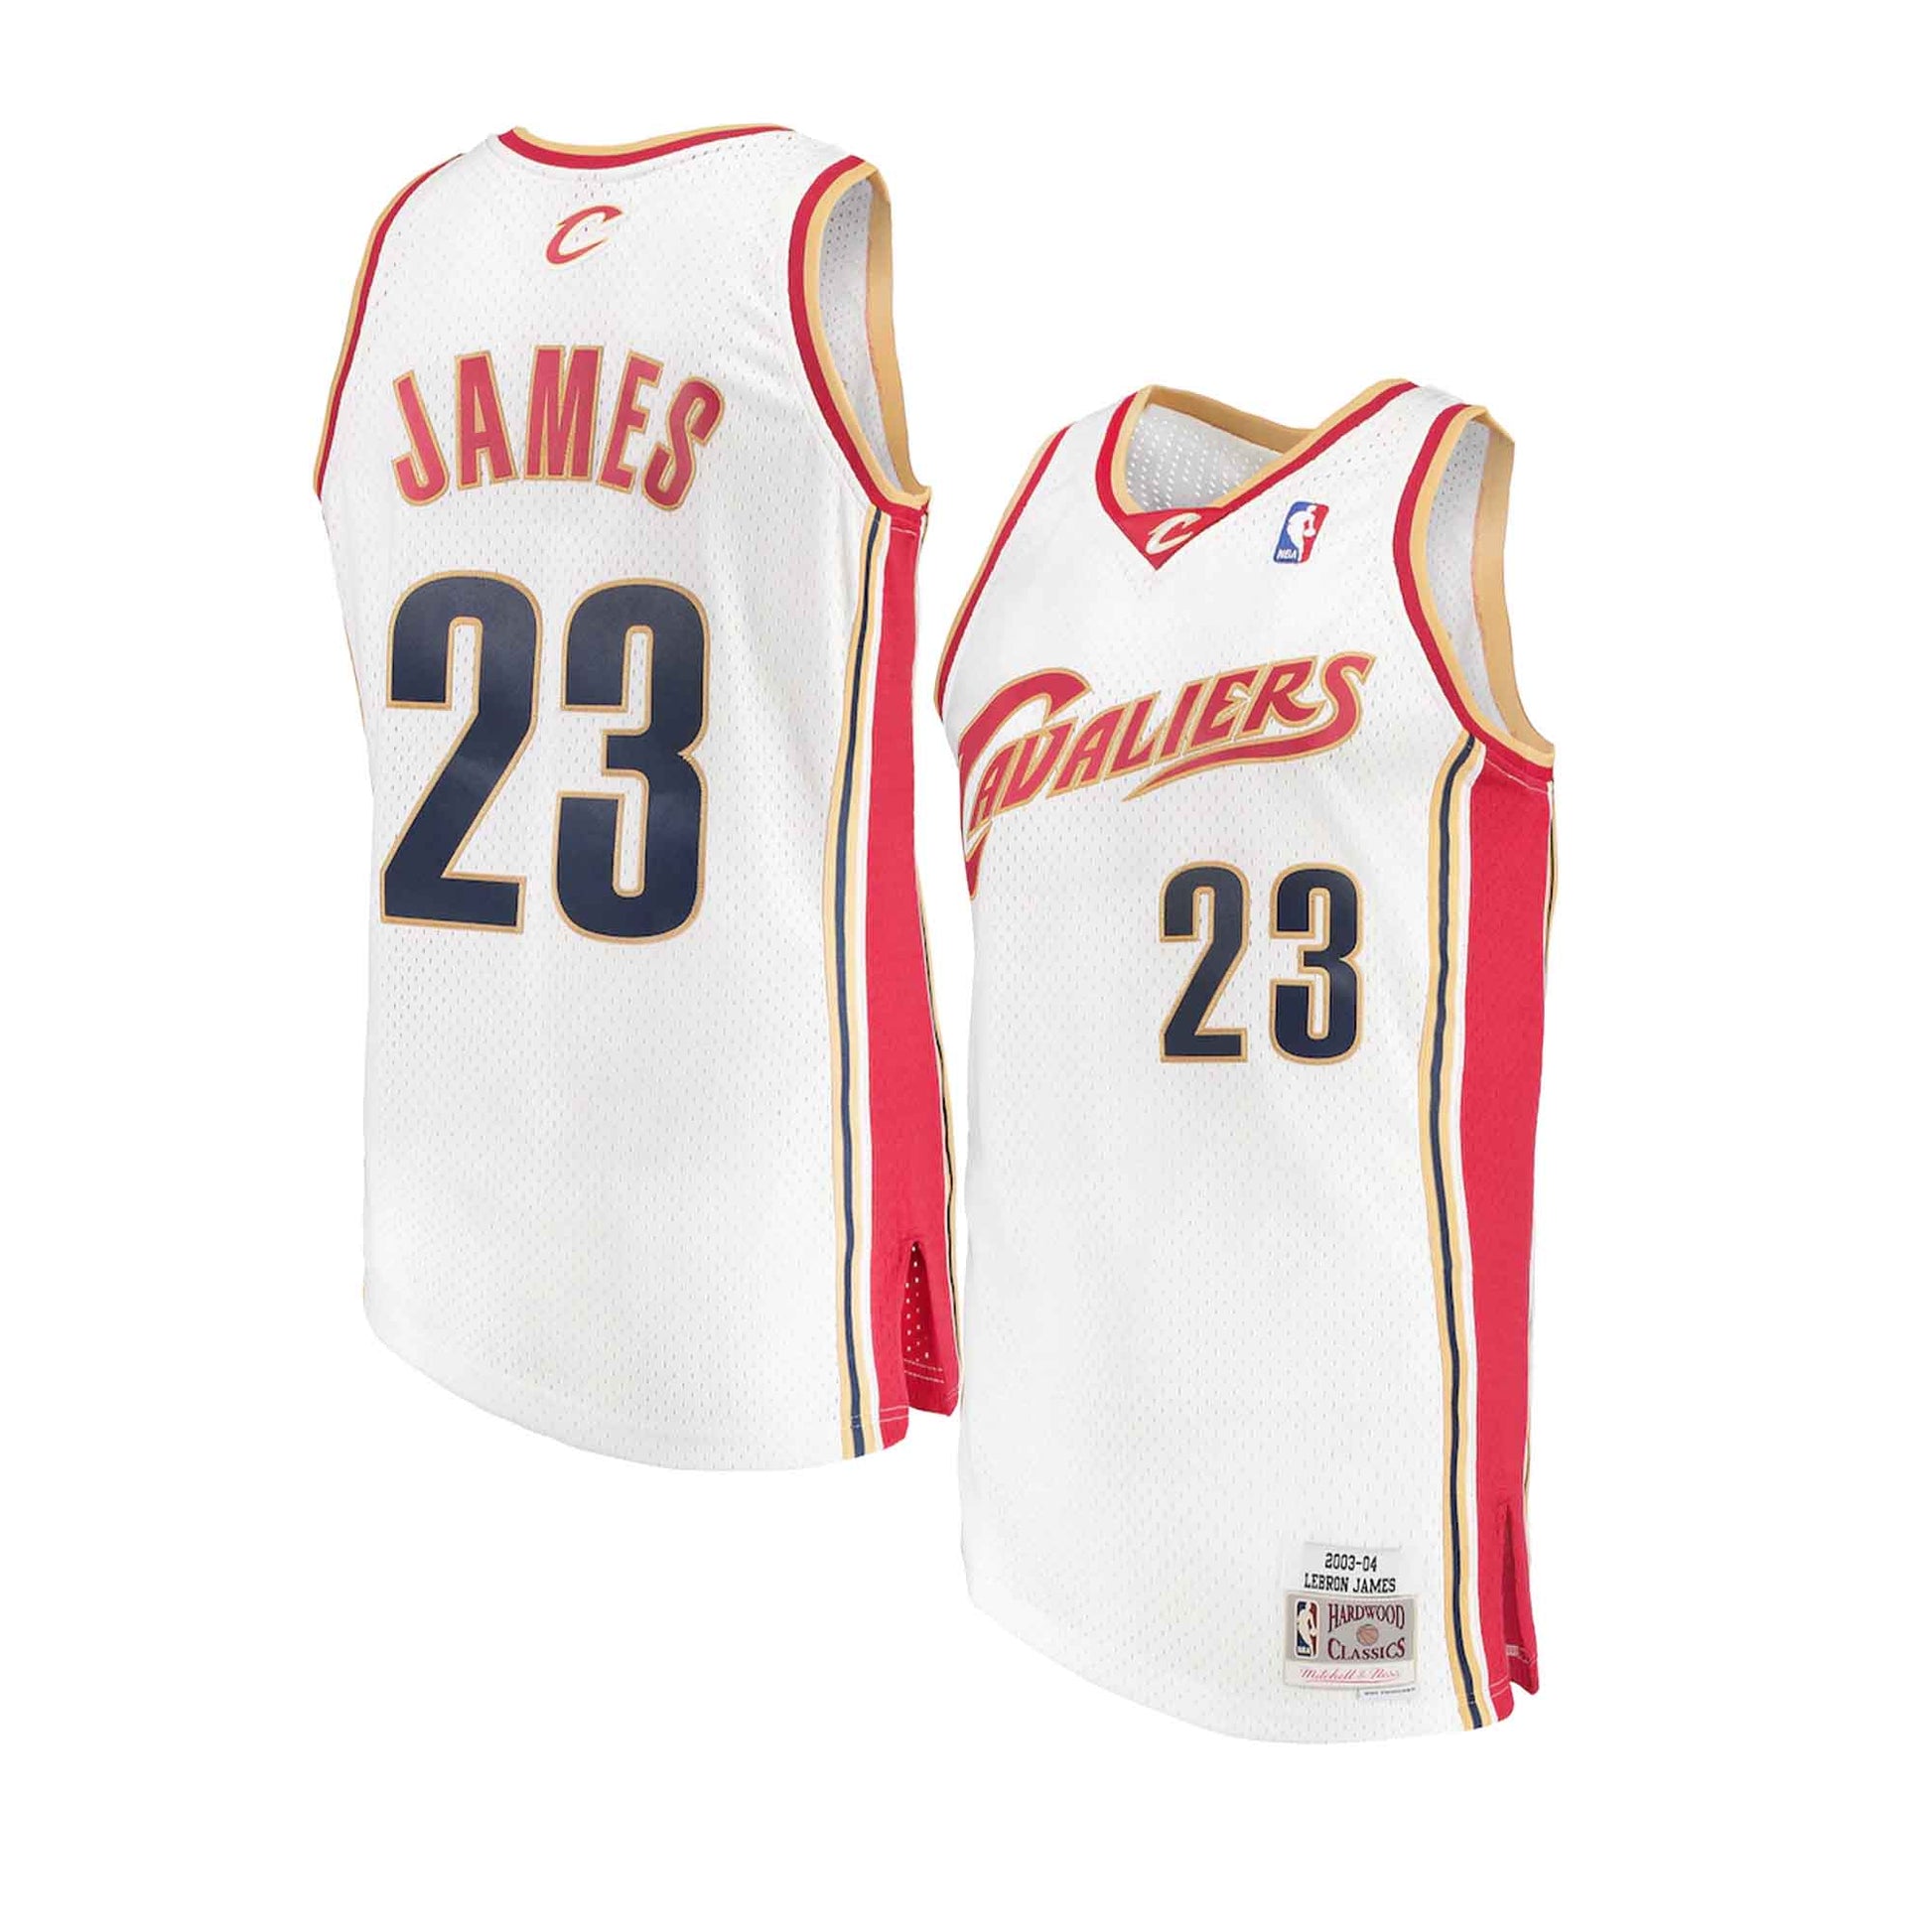 LeBron James Cleveland Cavaliers 2003-04 White Jersey – Best